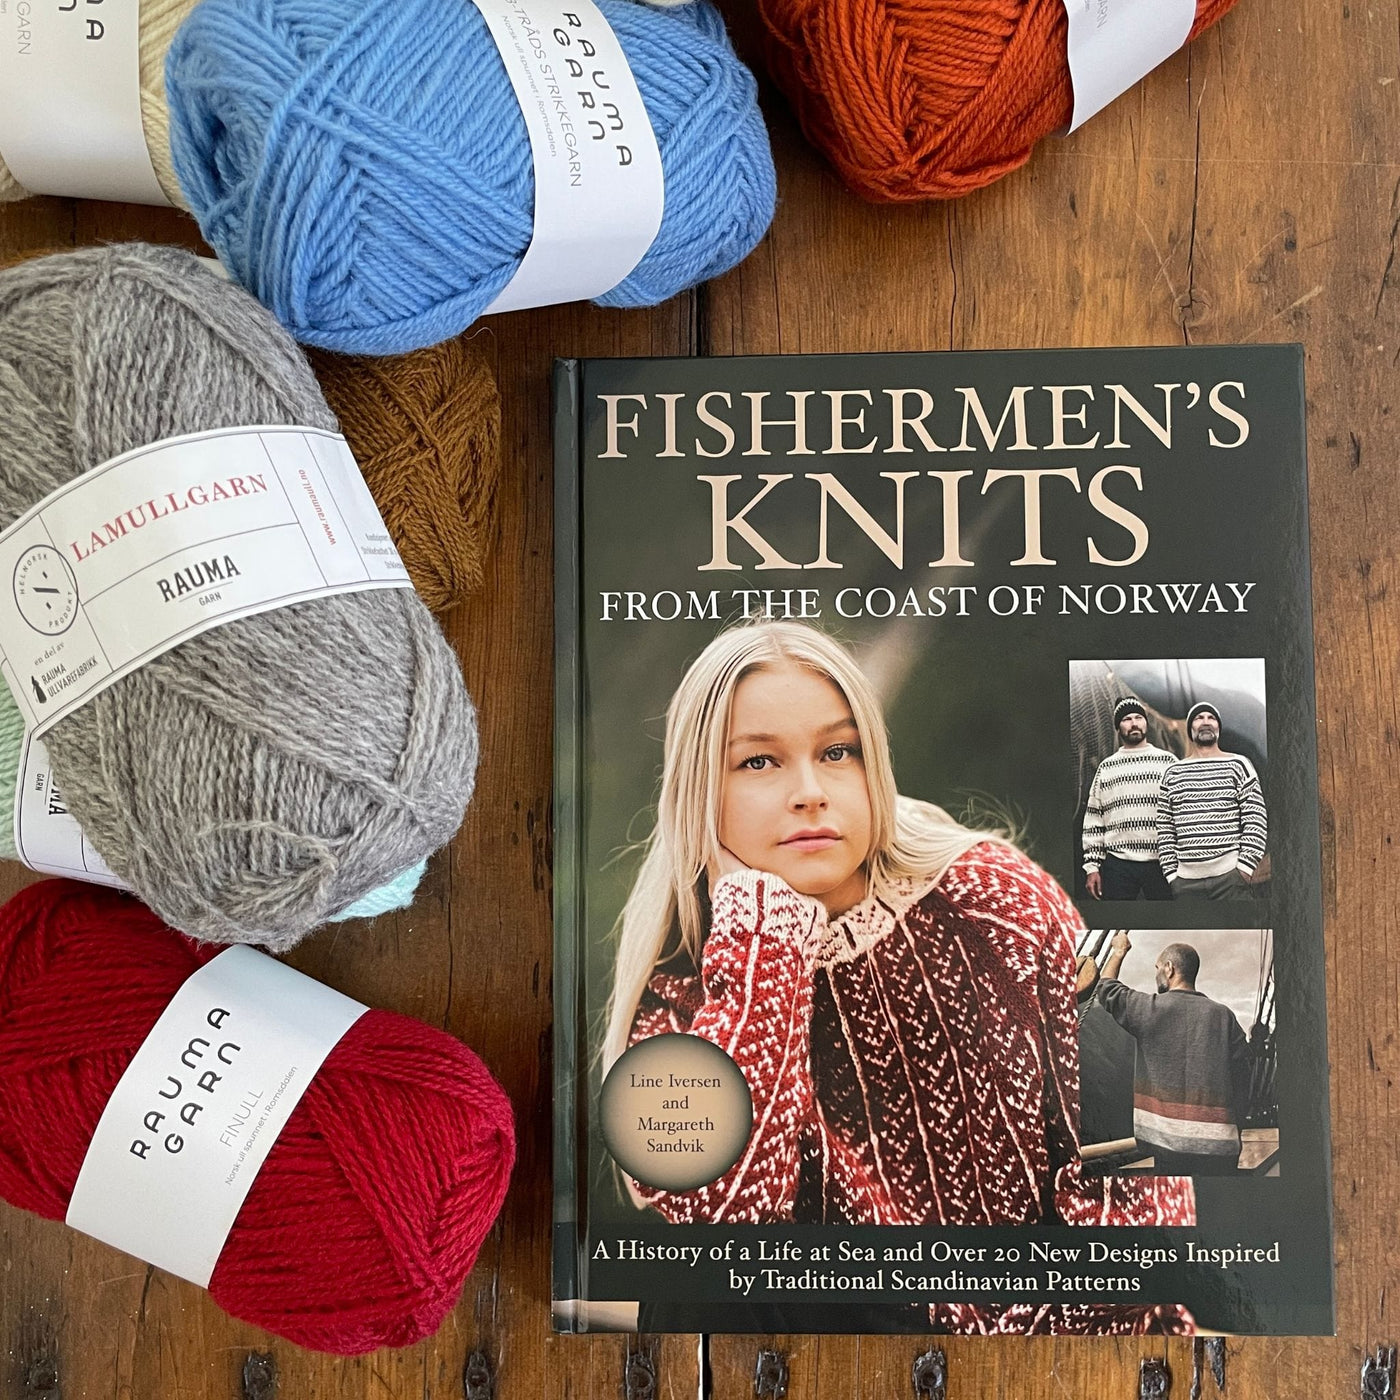 Inside pages of Fishermen's Knits from the Coast of Norway. Book sitting on table surrounded by various Rauma yarn.